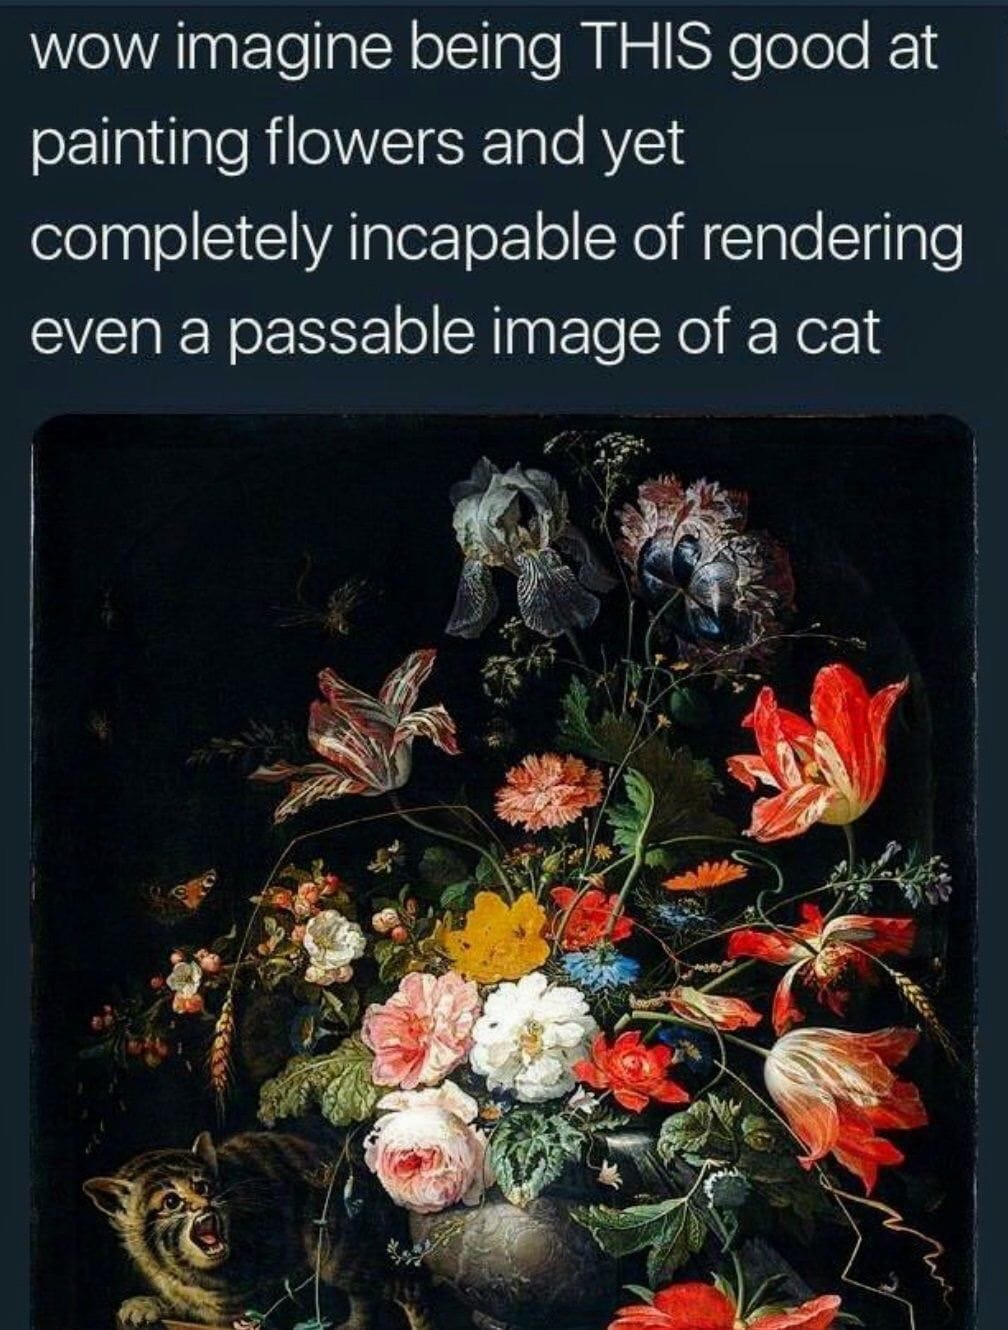 overturned bouquet by abraham mignon - wow imagine being This good at painting flowers and yet completely incapable of rendering even a passable image of a cat